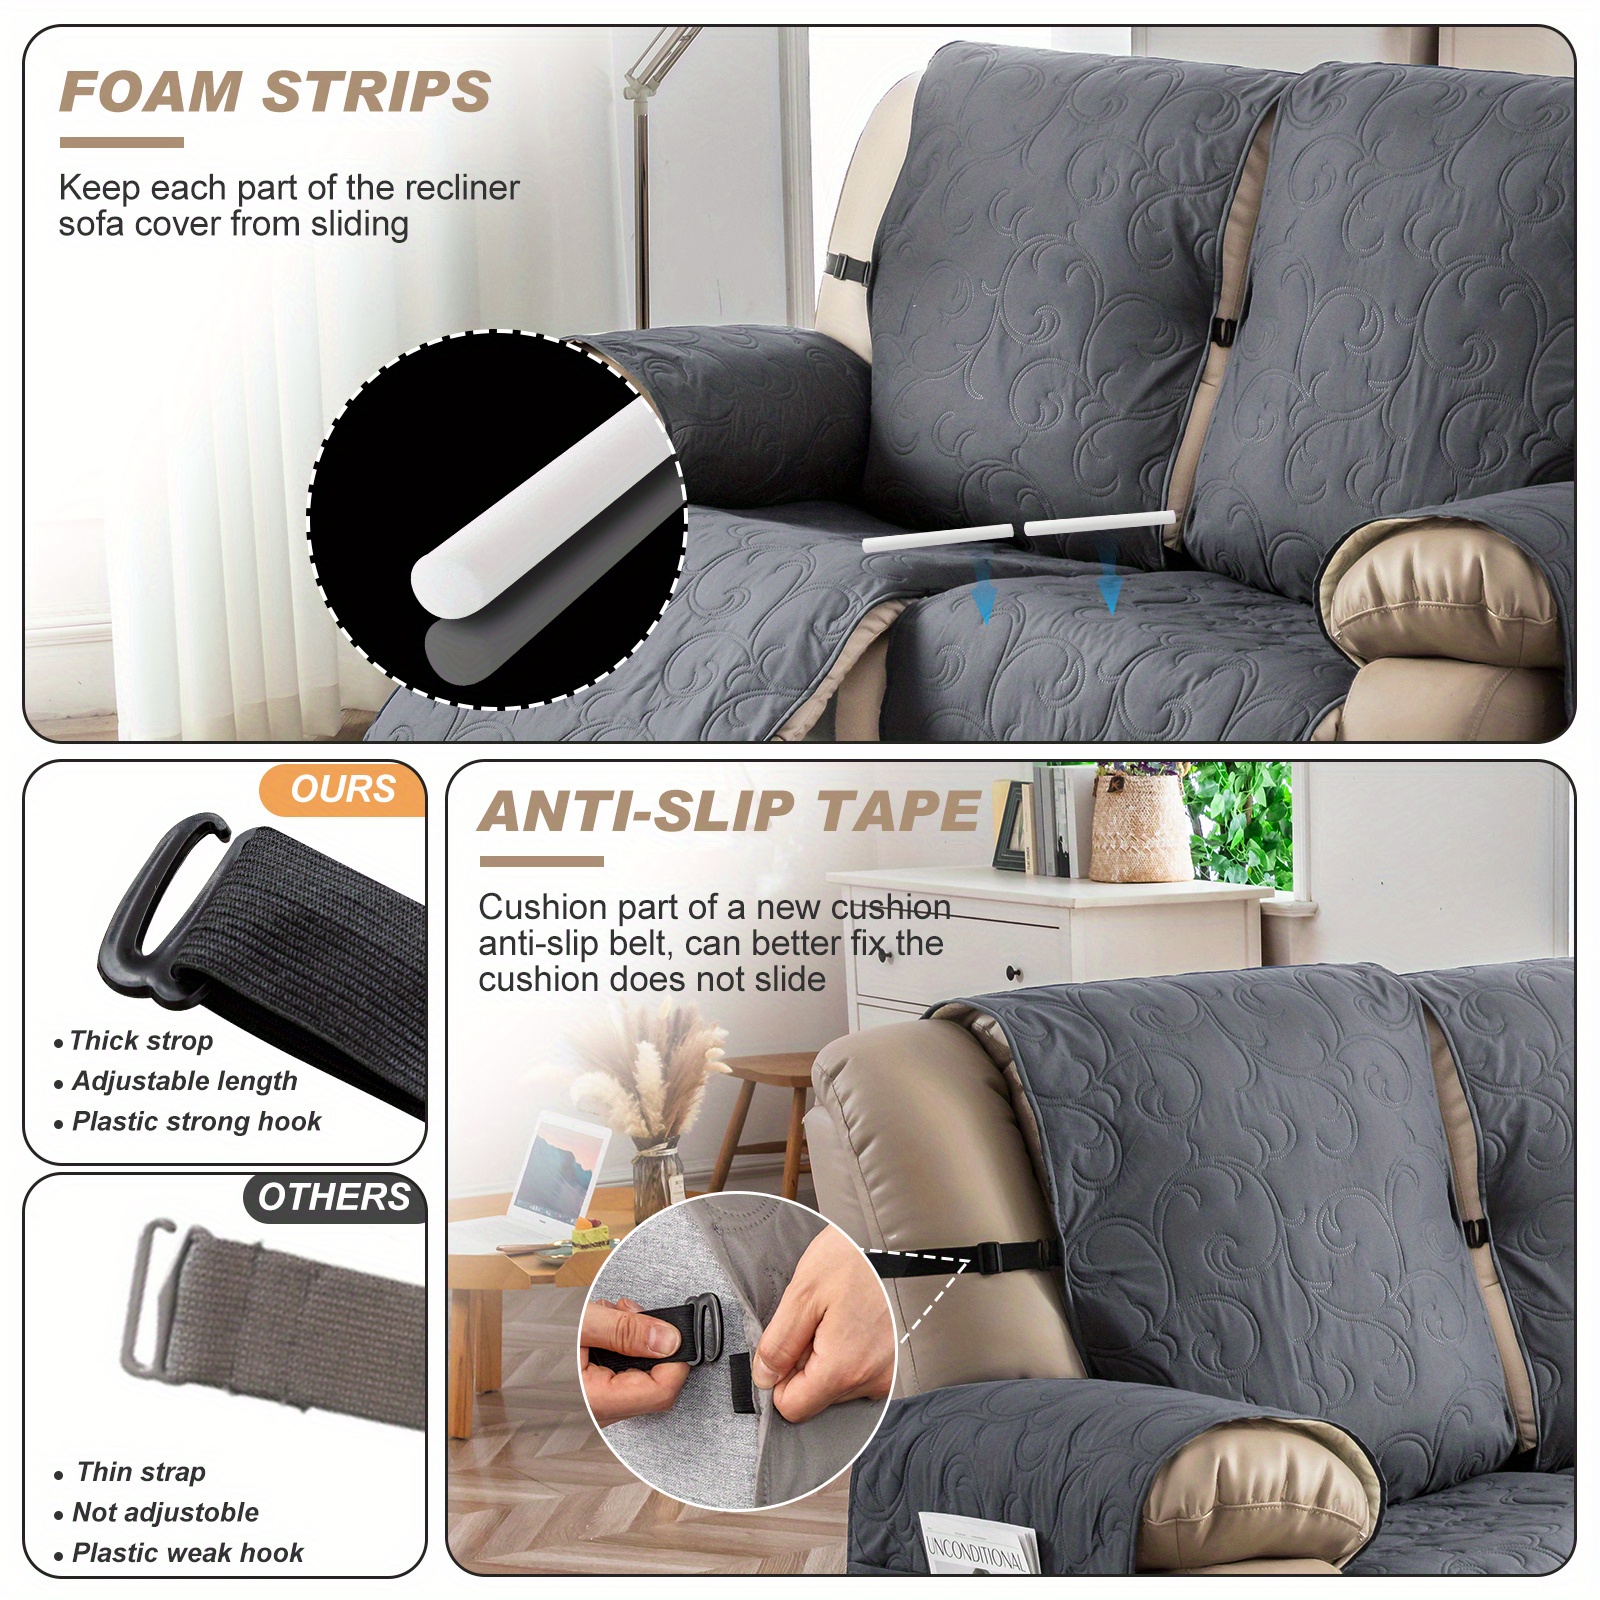 Adjustable Elastic Couch Cover Straps - 3 pack